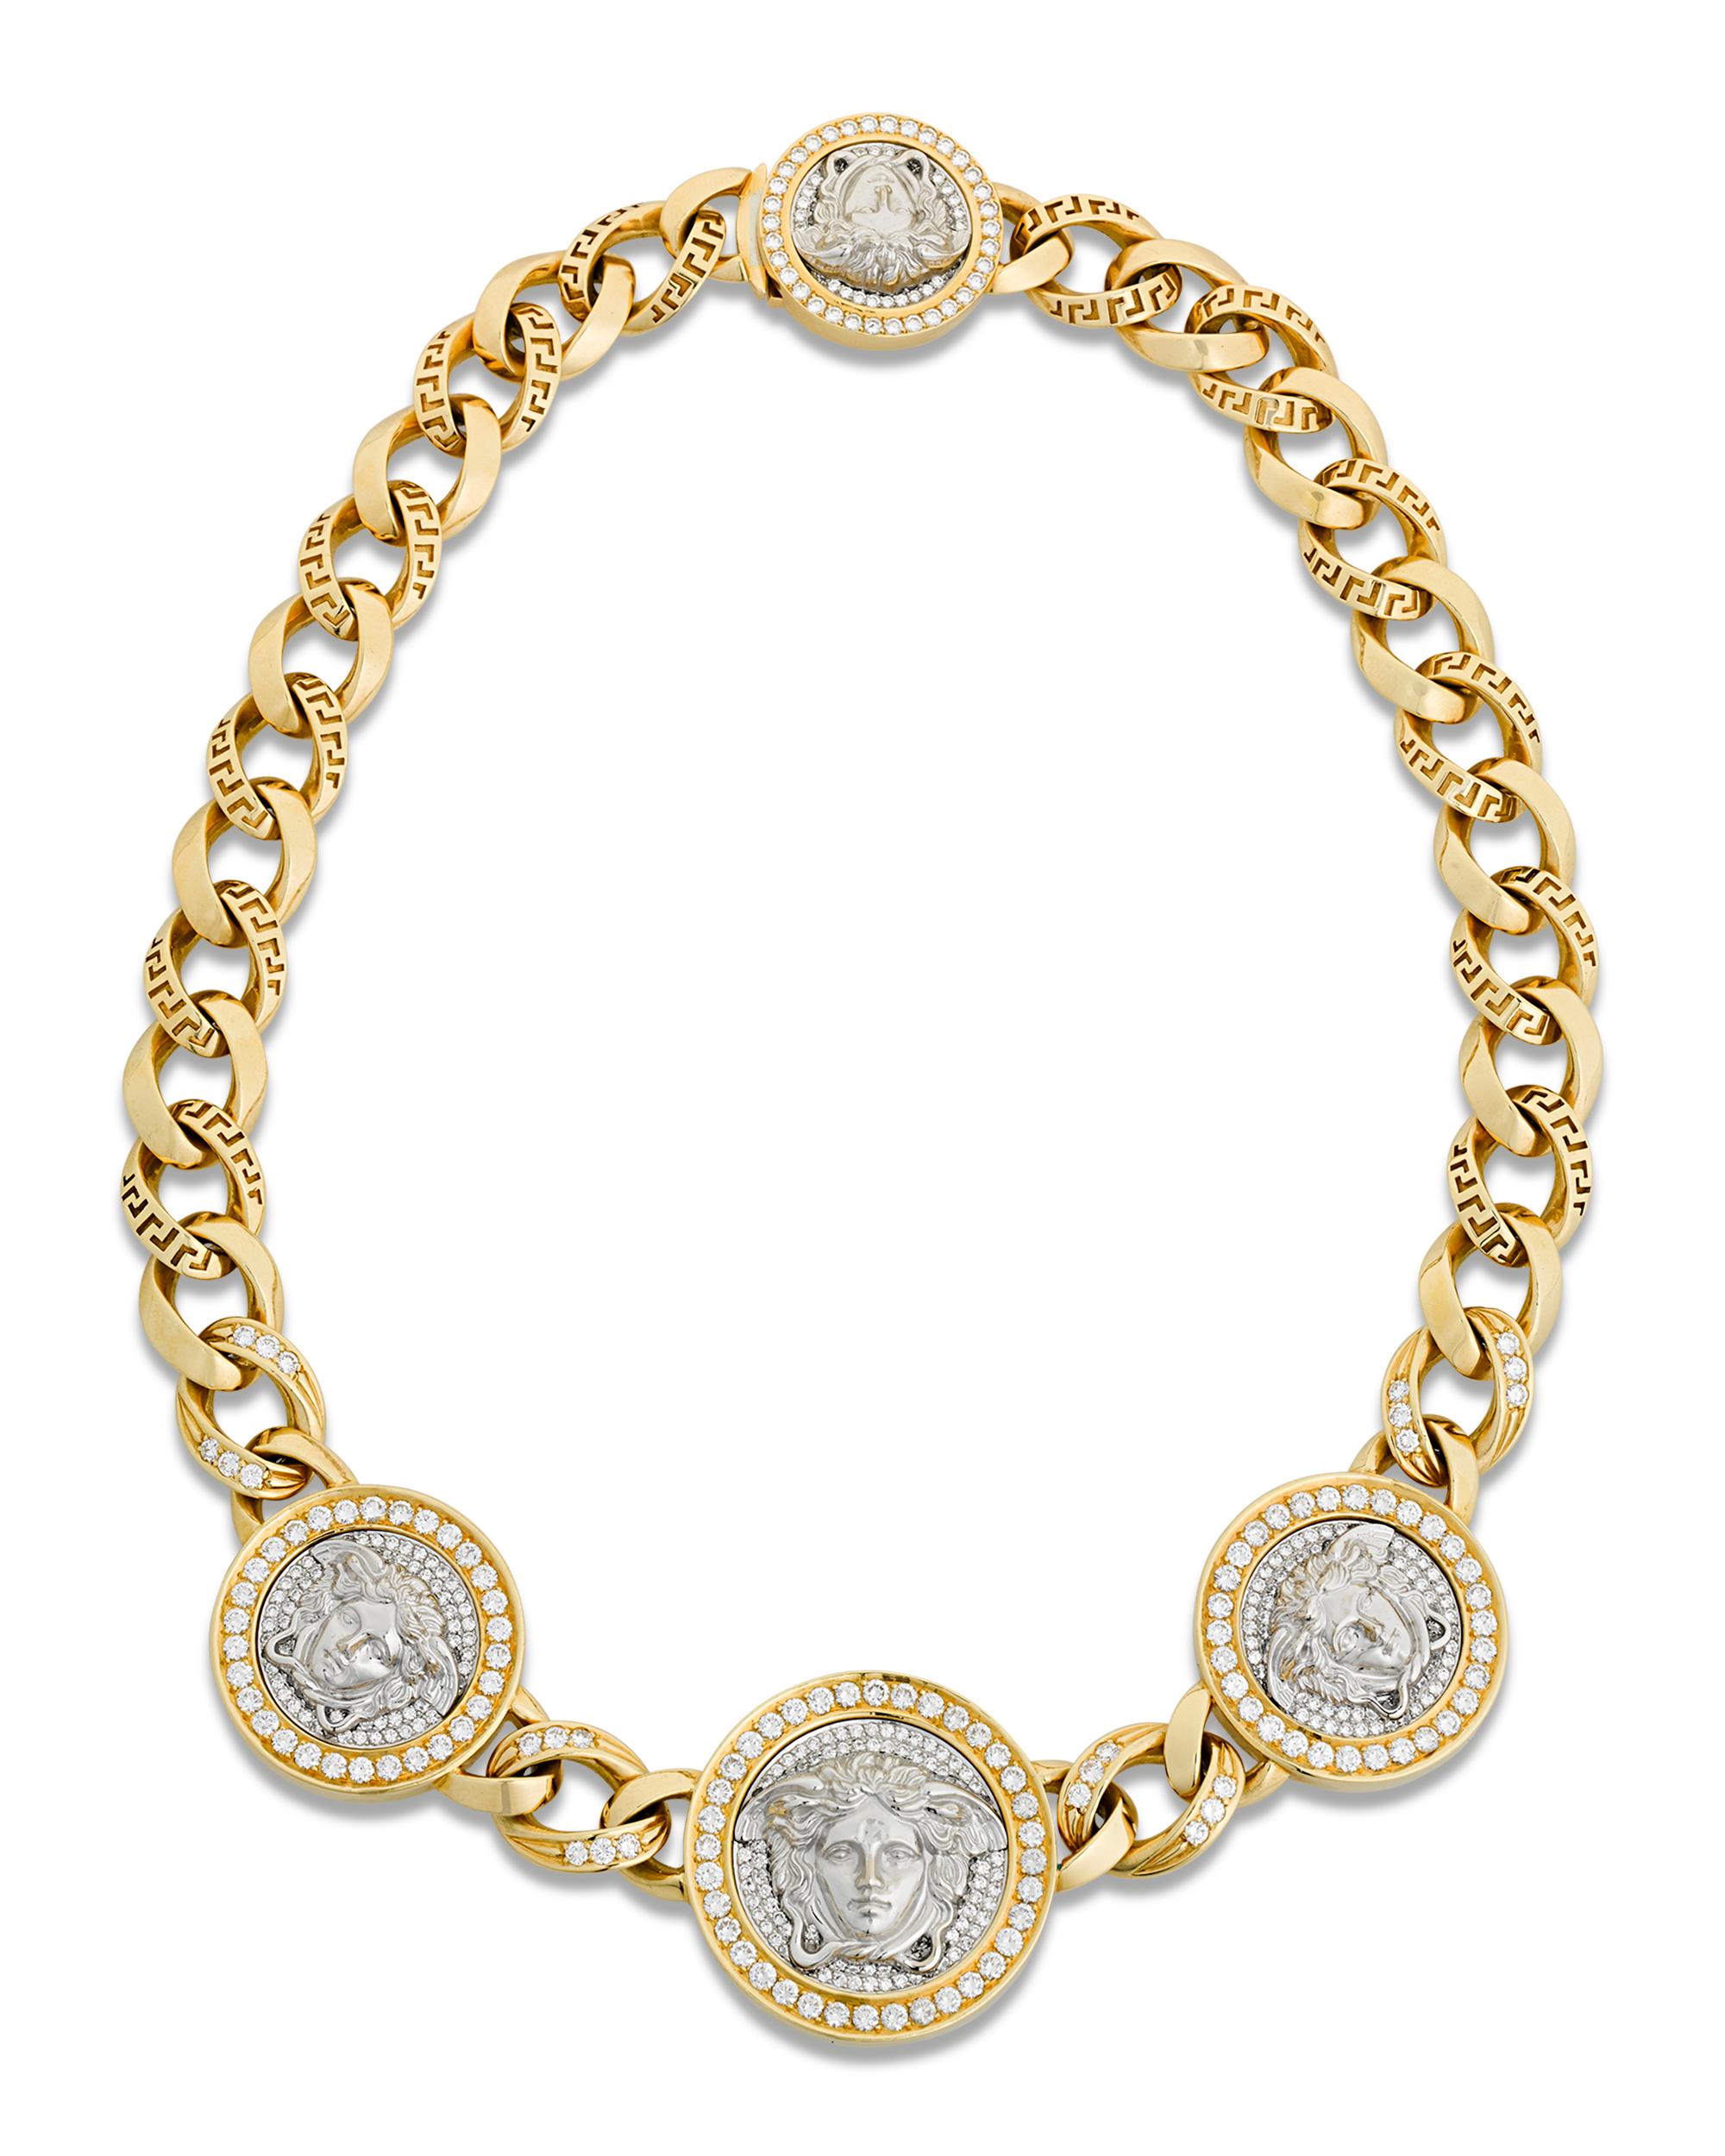 The iconic logo of the Italian firm is the focus of this incredible Versace necklace. The 18K gold piece comprises three medallions featuring the head of Medusa between large gold links. The medallions are encircled by white diamonds totaling